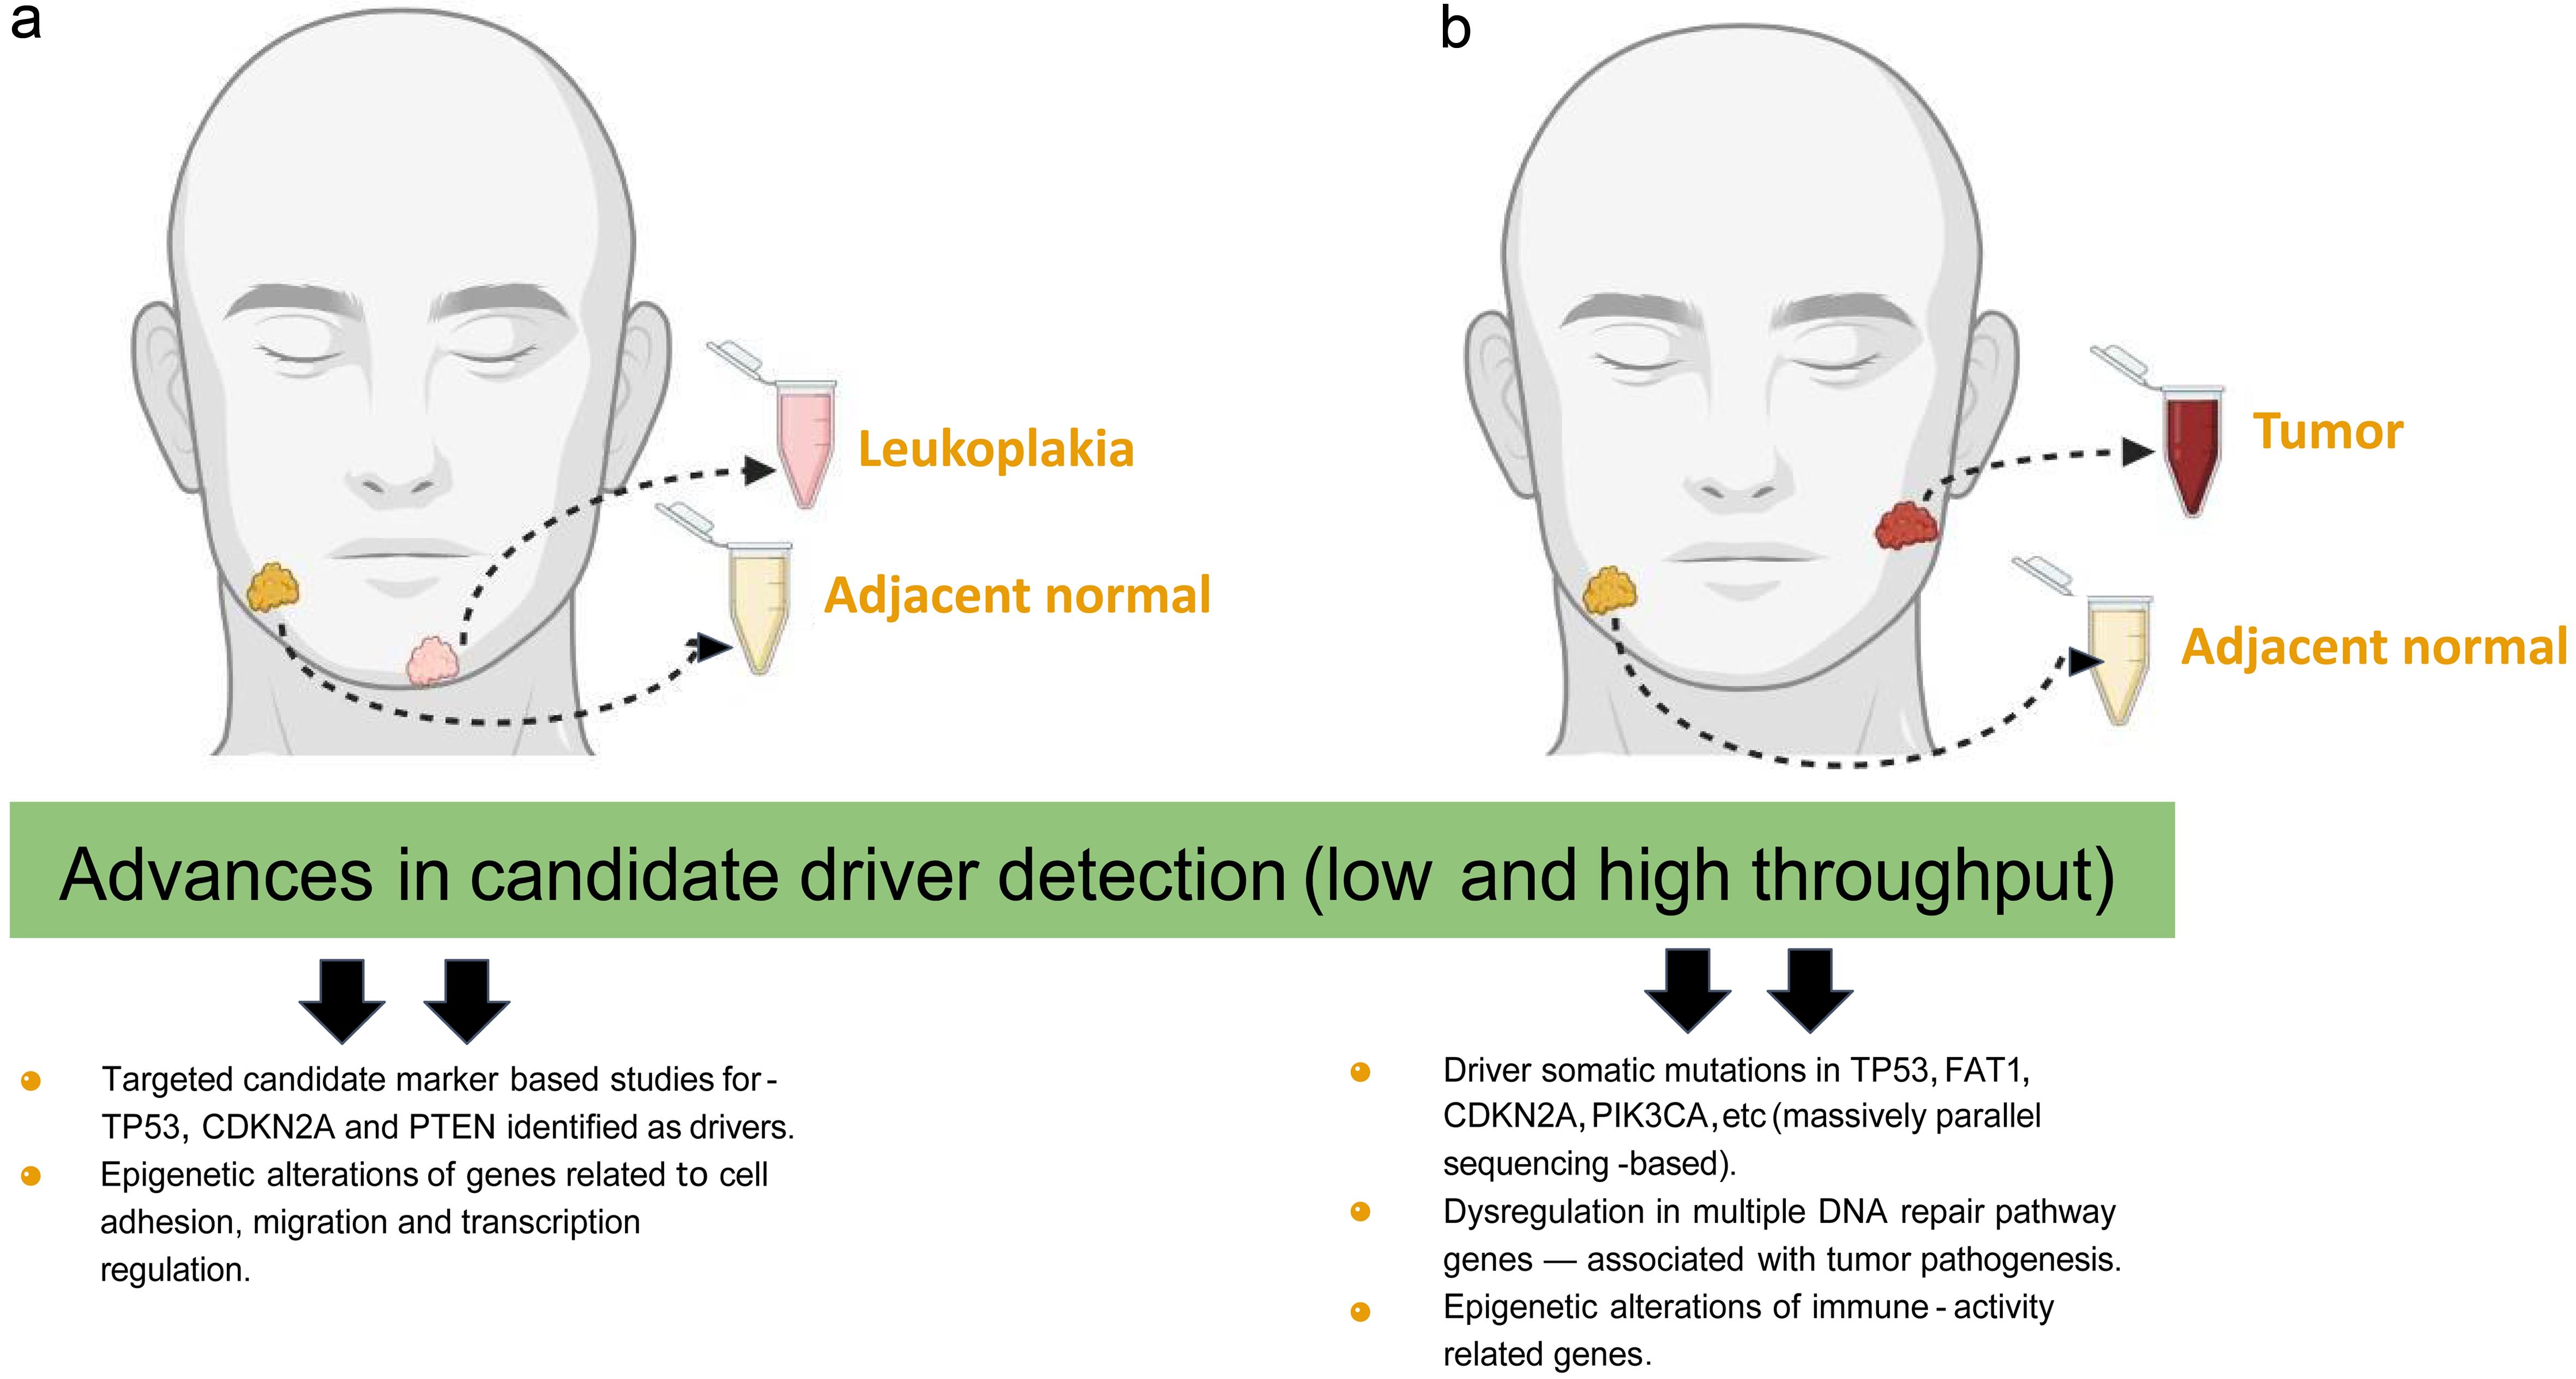 Candidate marker and omics-based findings associated with tumor progression in disparate patients with oral leukoplakia (a) and tumor (b) in their oral cavities.